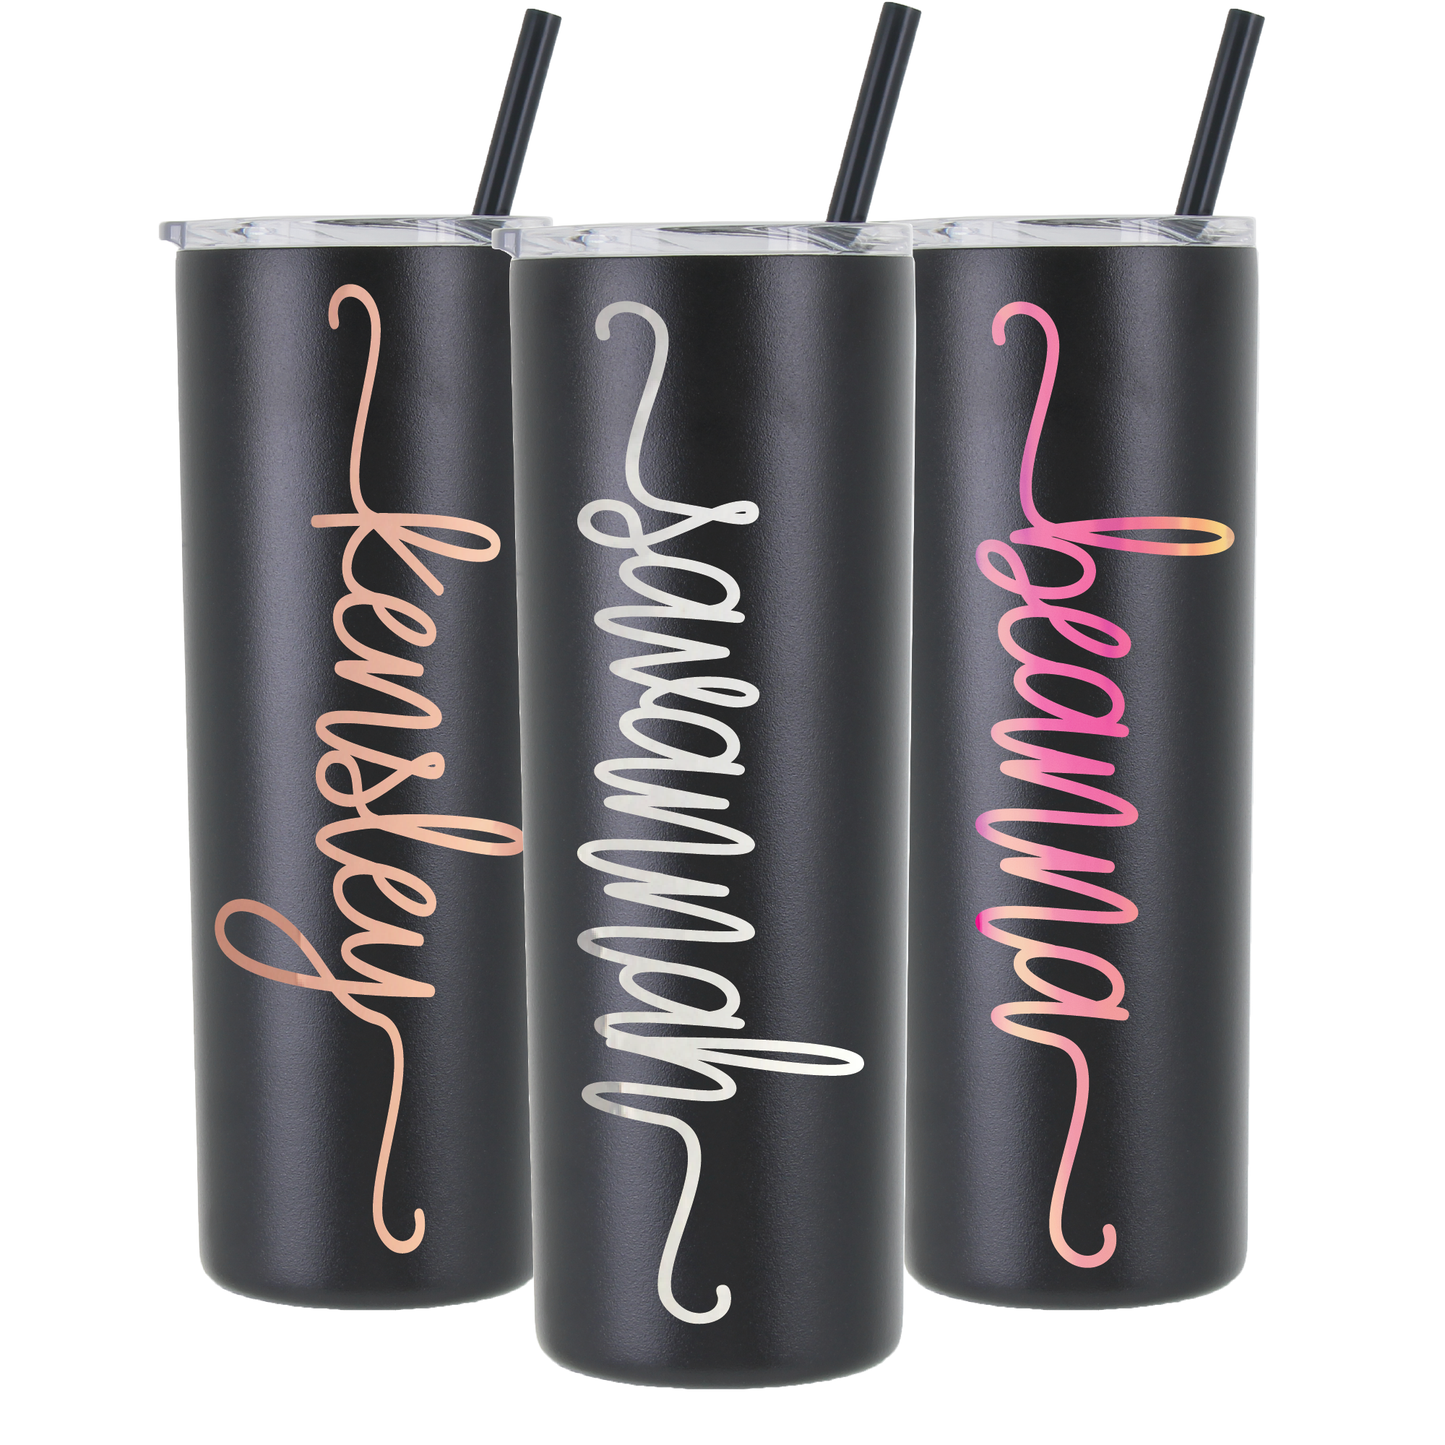 20 oz Stainless Steel Skinny Tumbler with Personalized Swirl Name Decal in Opal or Chrome Vinyl